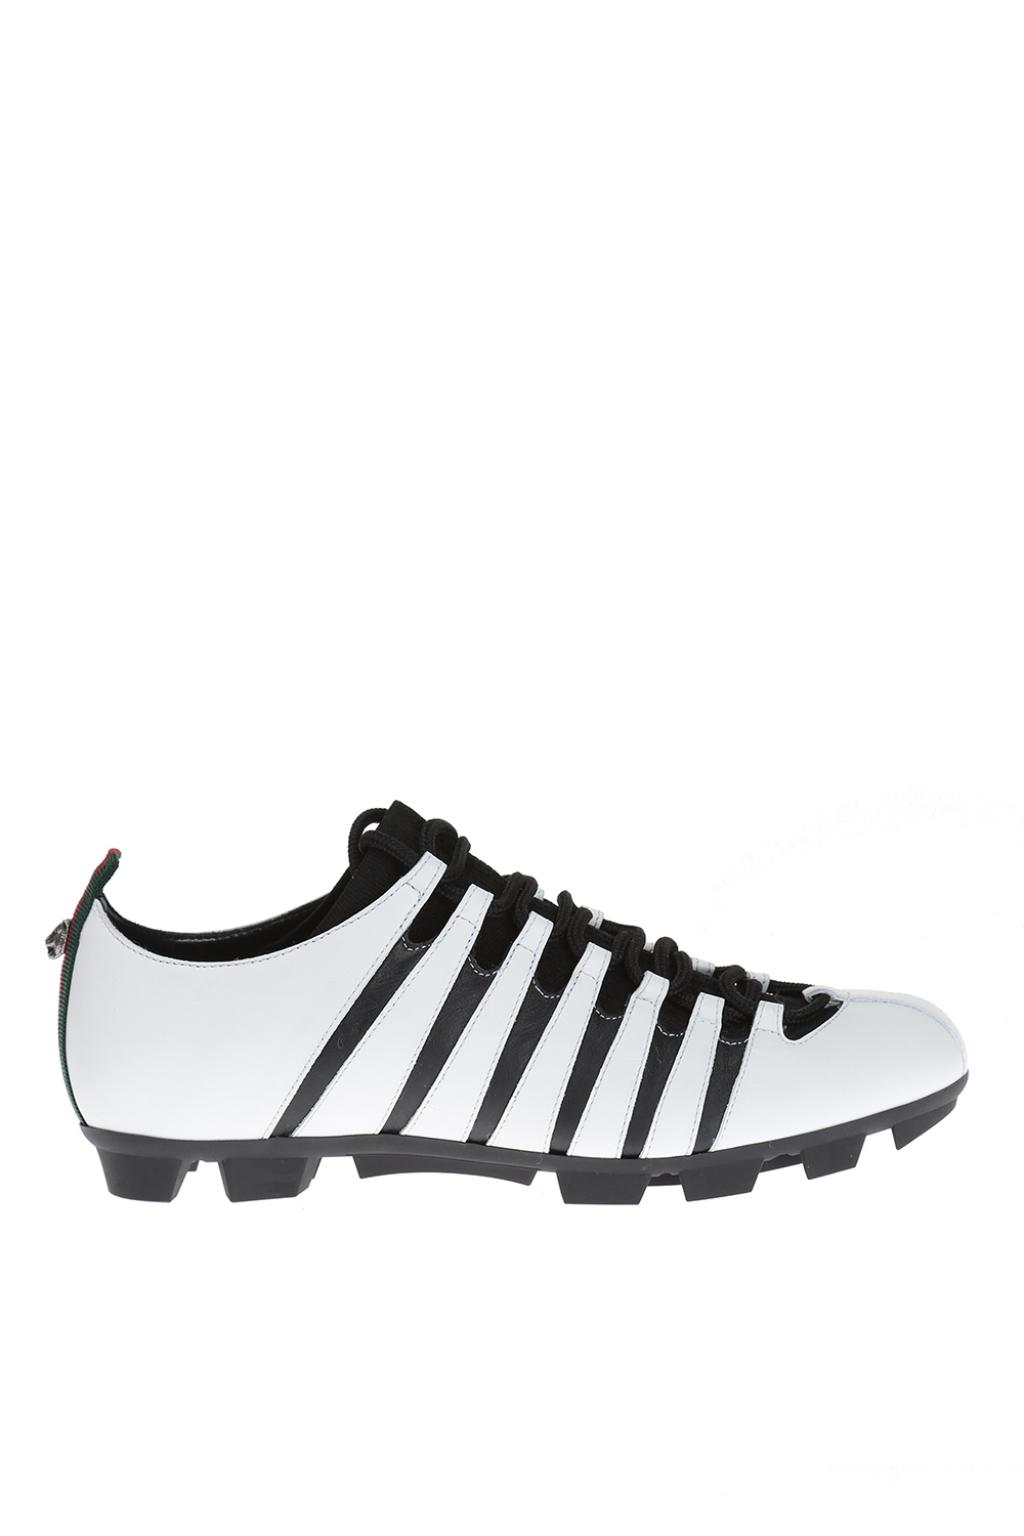 Gucci Black Titan Leather Football Boots for men